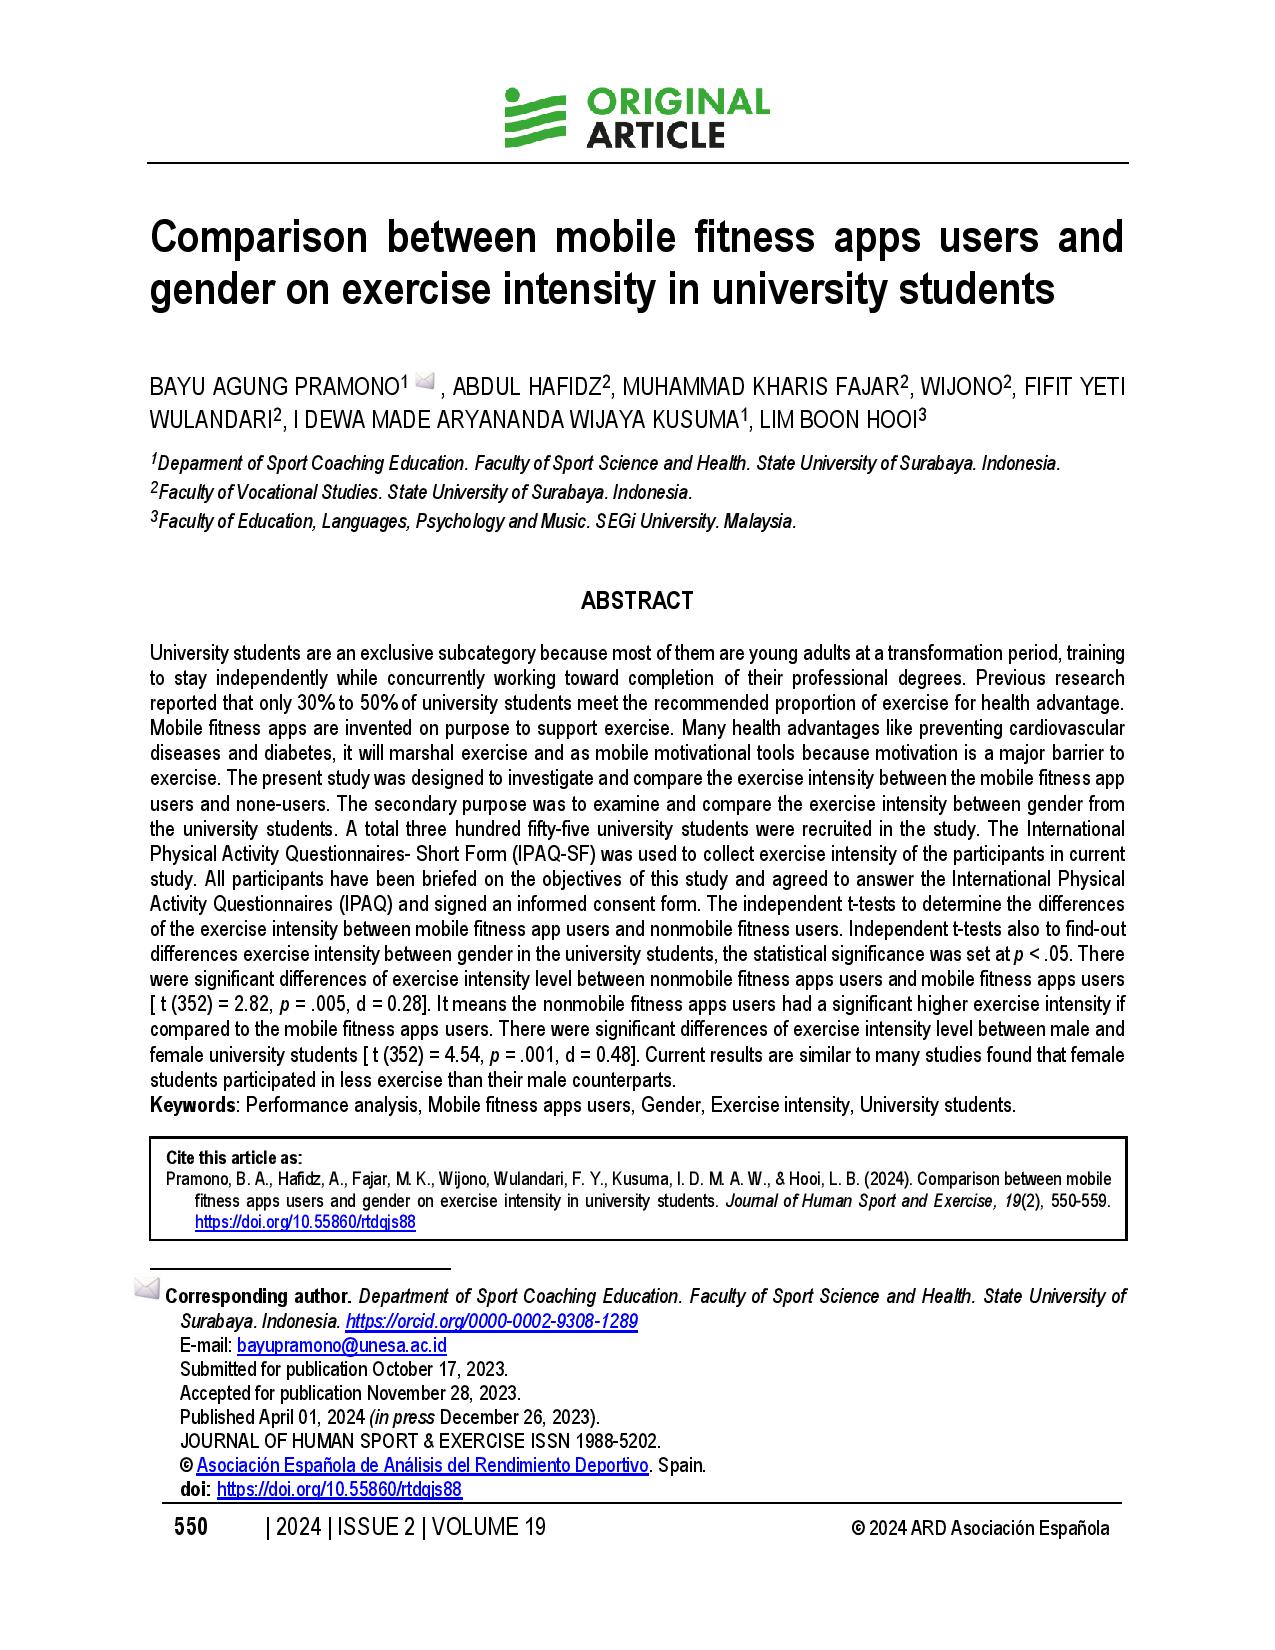 Comparison between mobile fitness apps users and gender on exercise intensity in university students